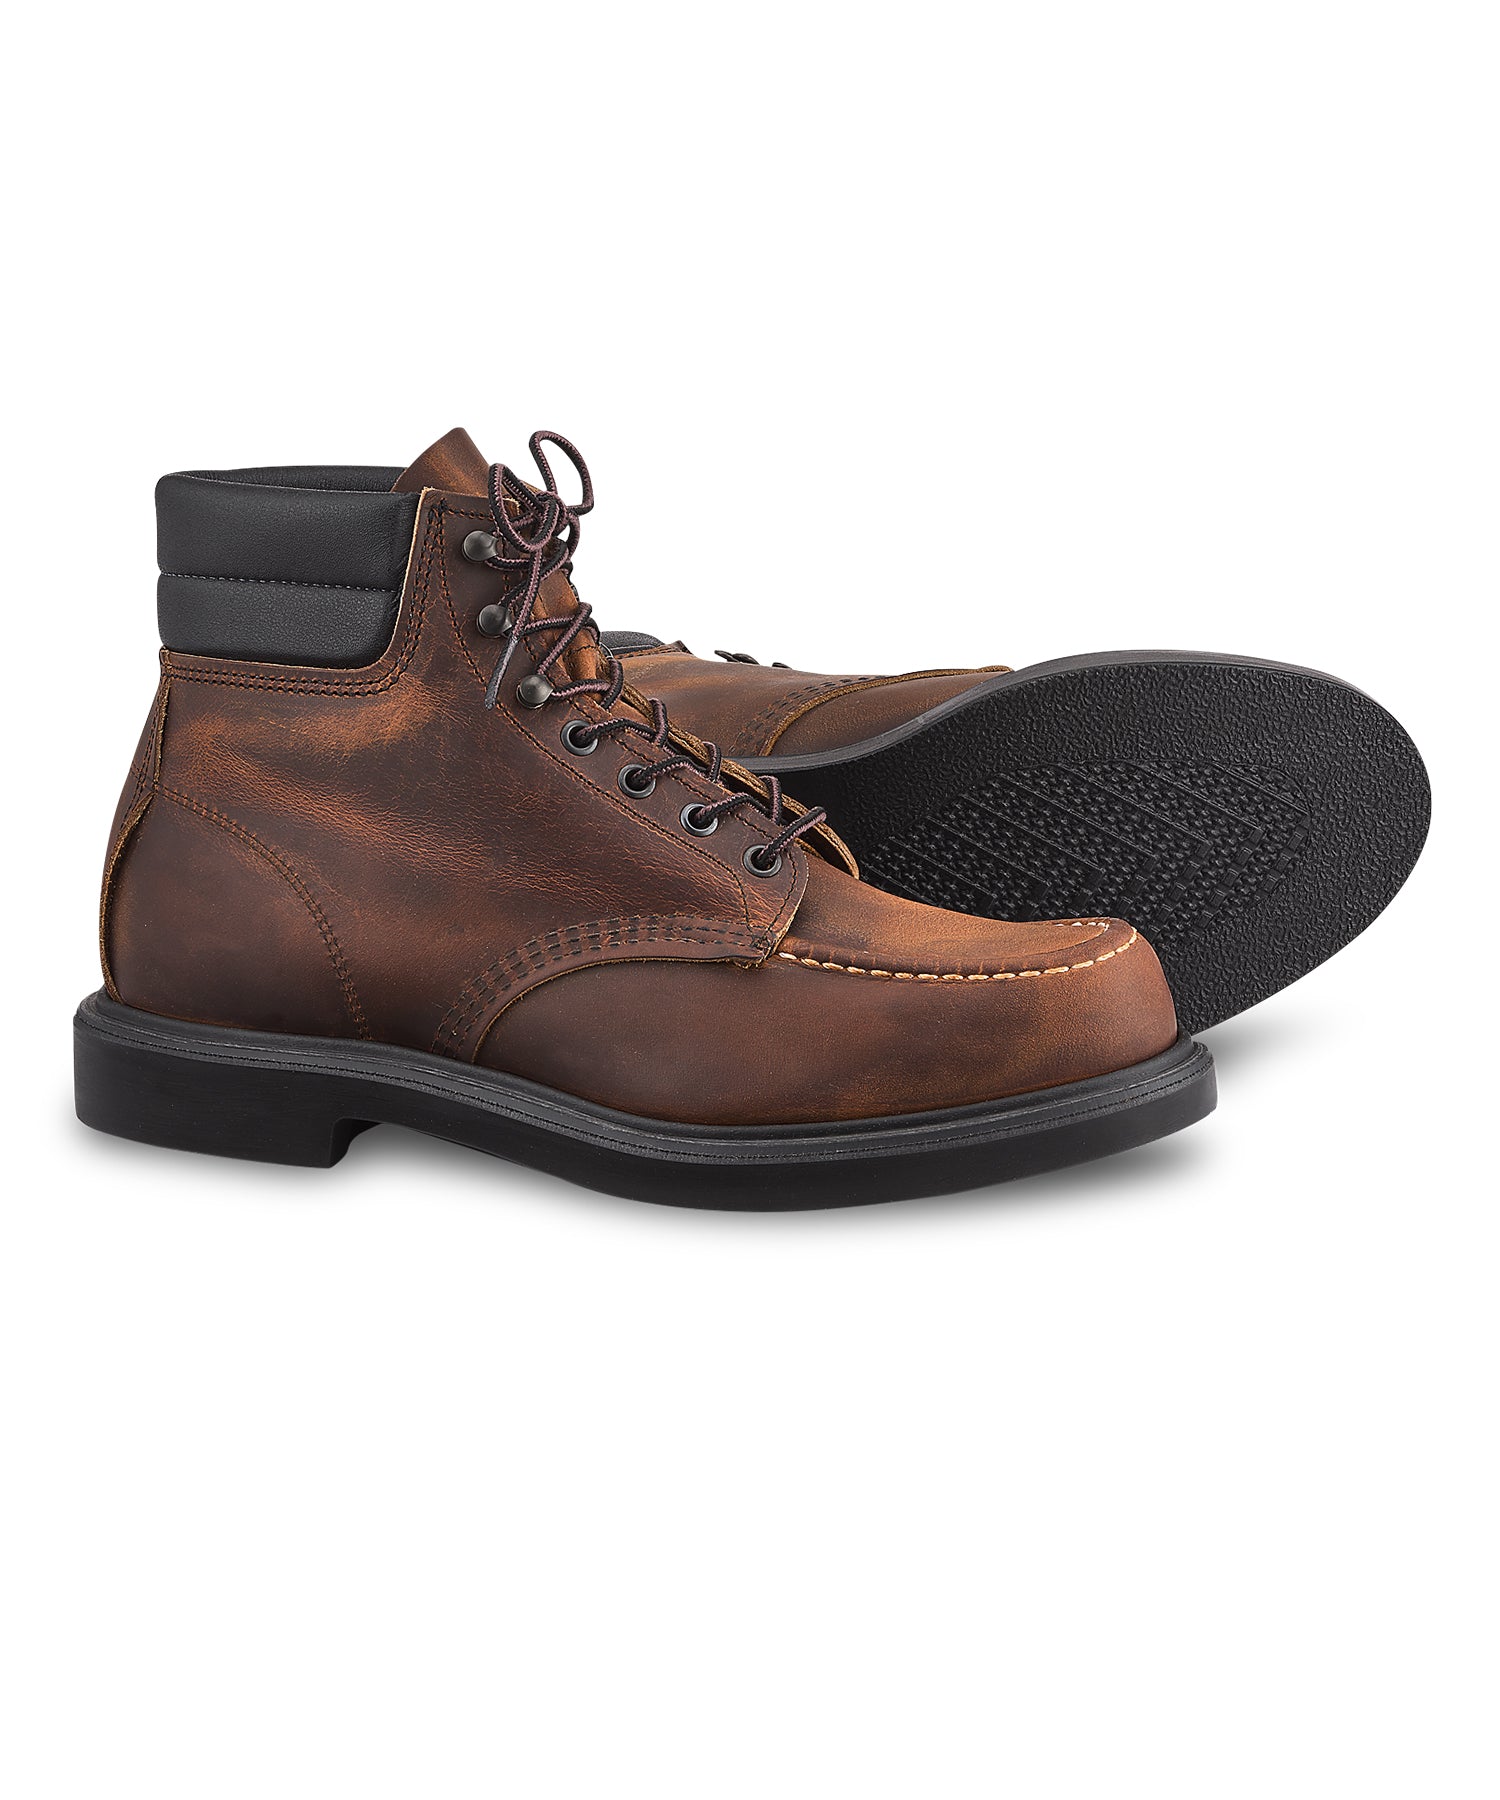 red wing shoes discount